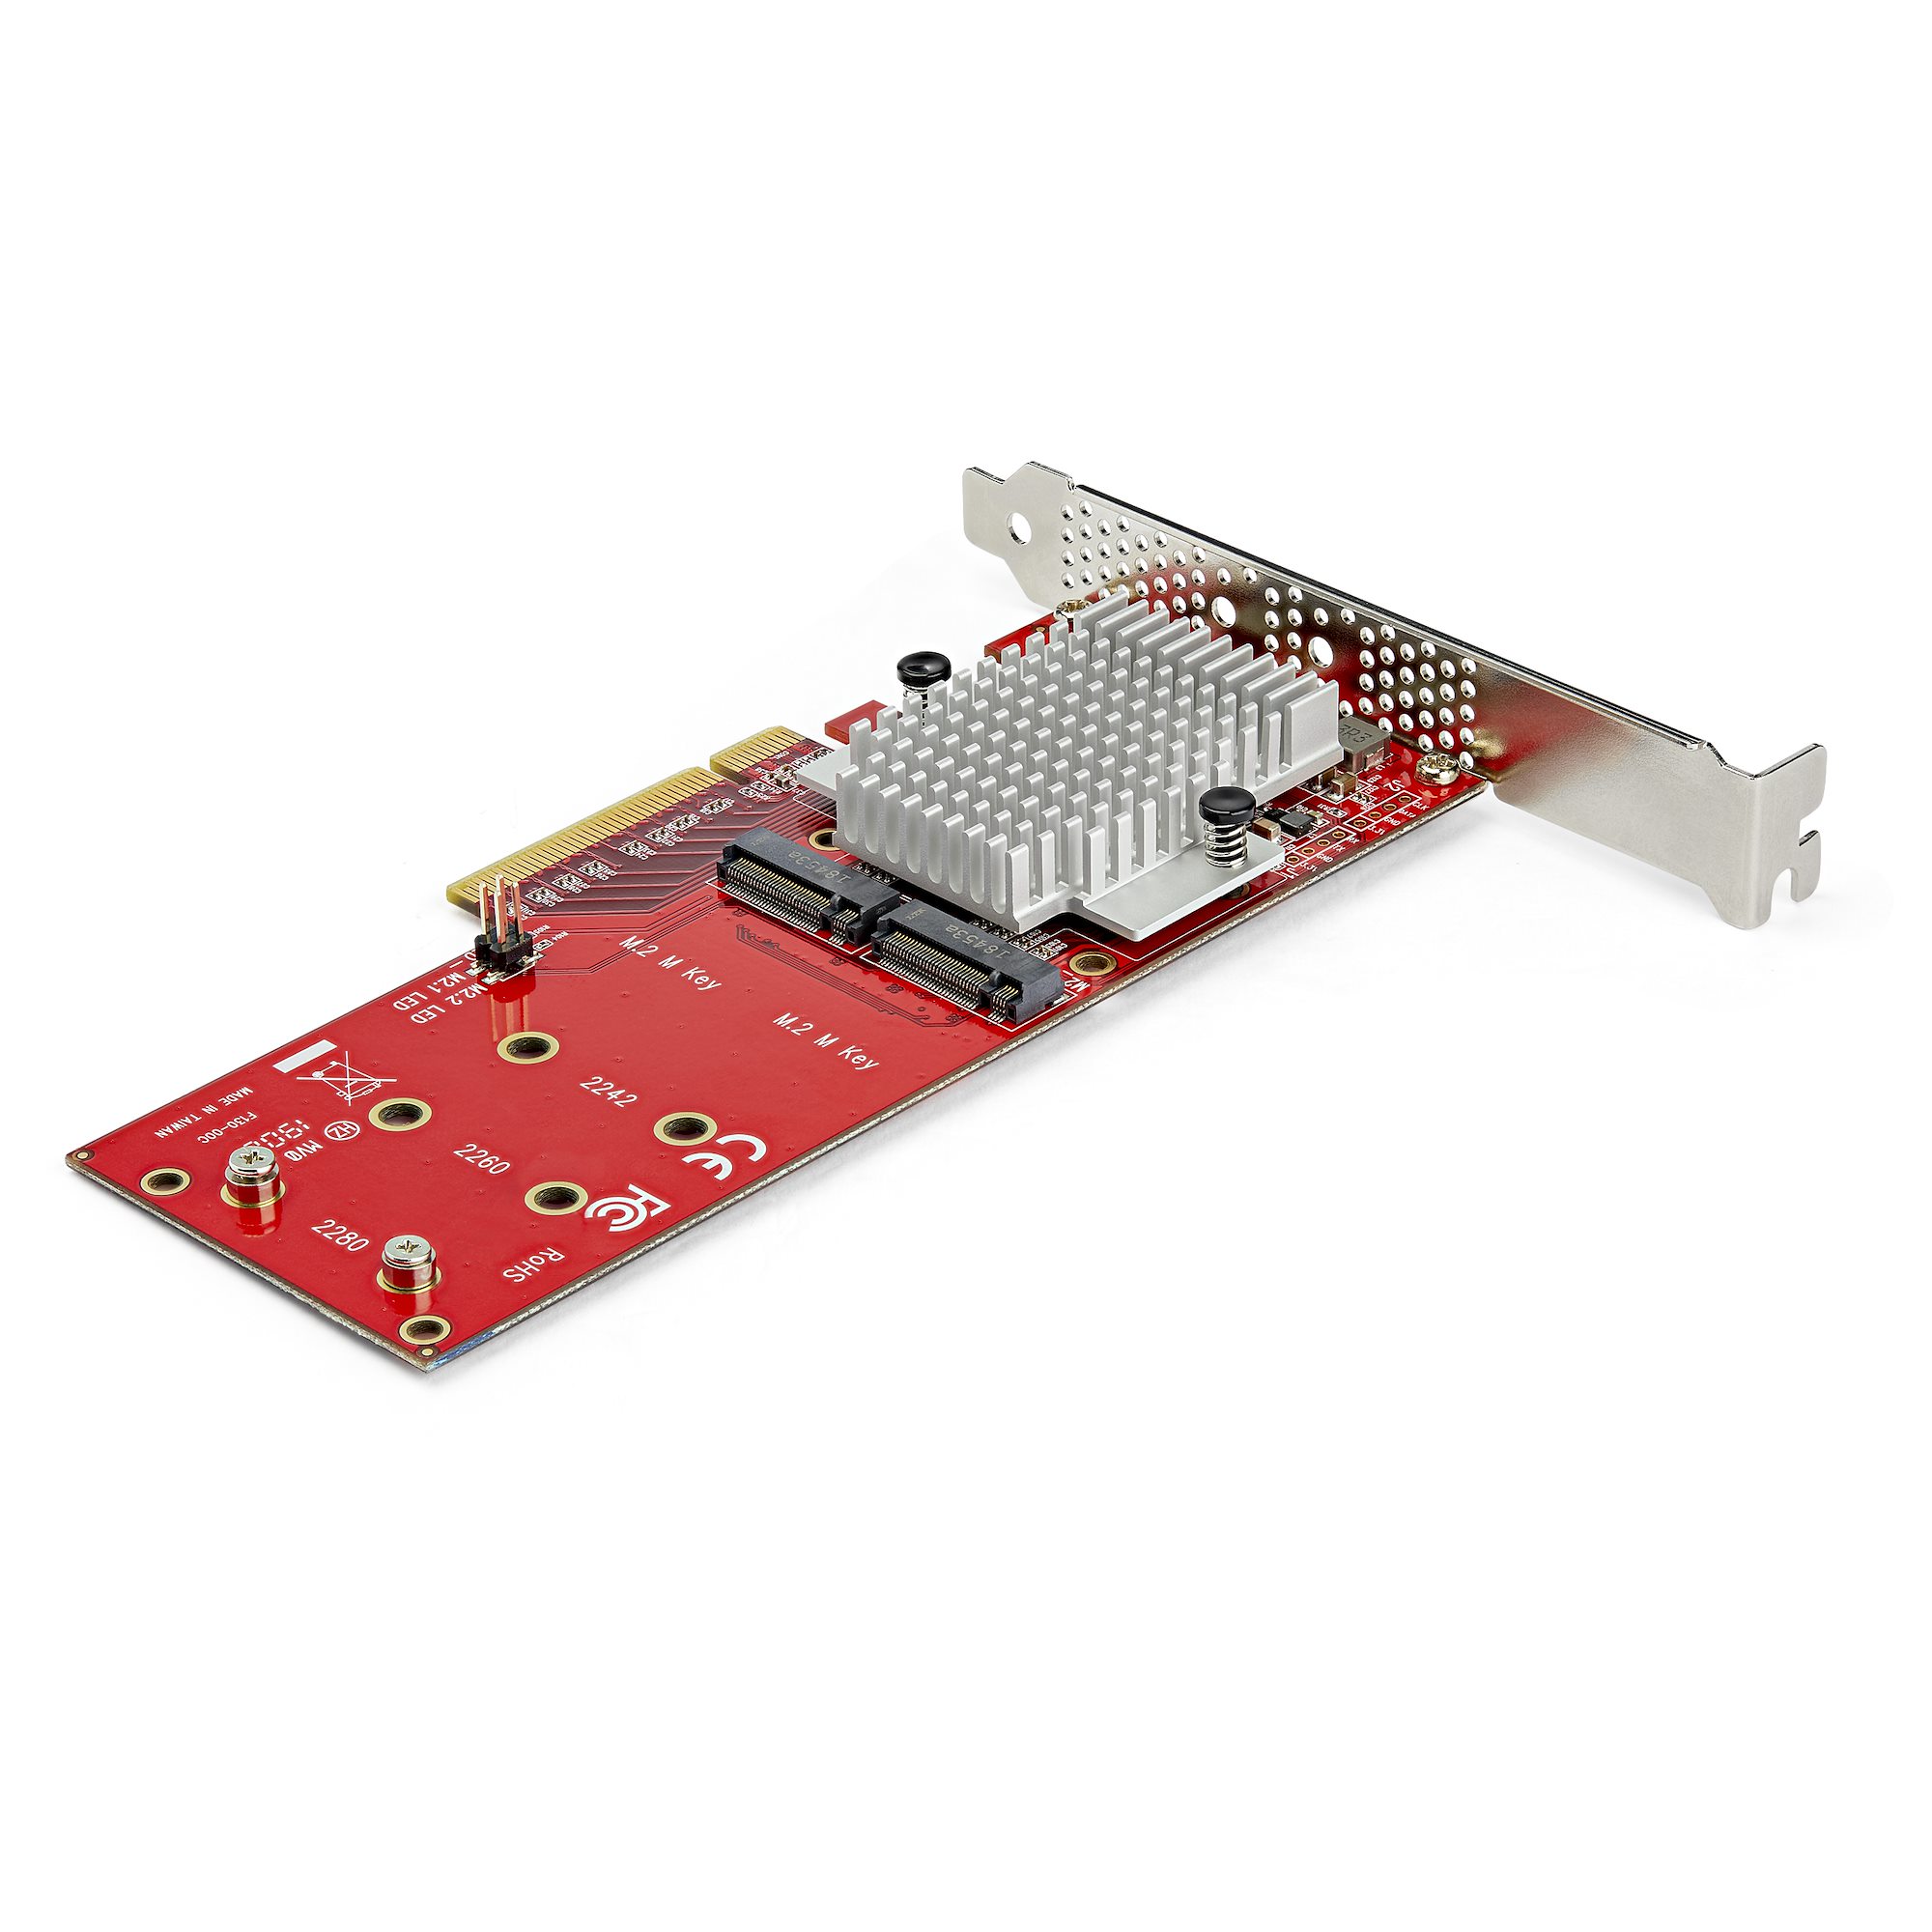 Government ordinance Confuse zoom Dual M.2 PCIe SSD Adapter Card NVME/AHCI - Drive Adapters and Drive  Converters | StarTech.com